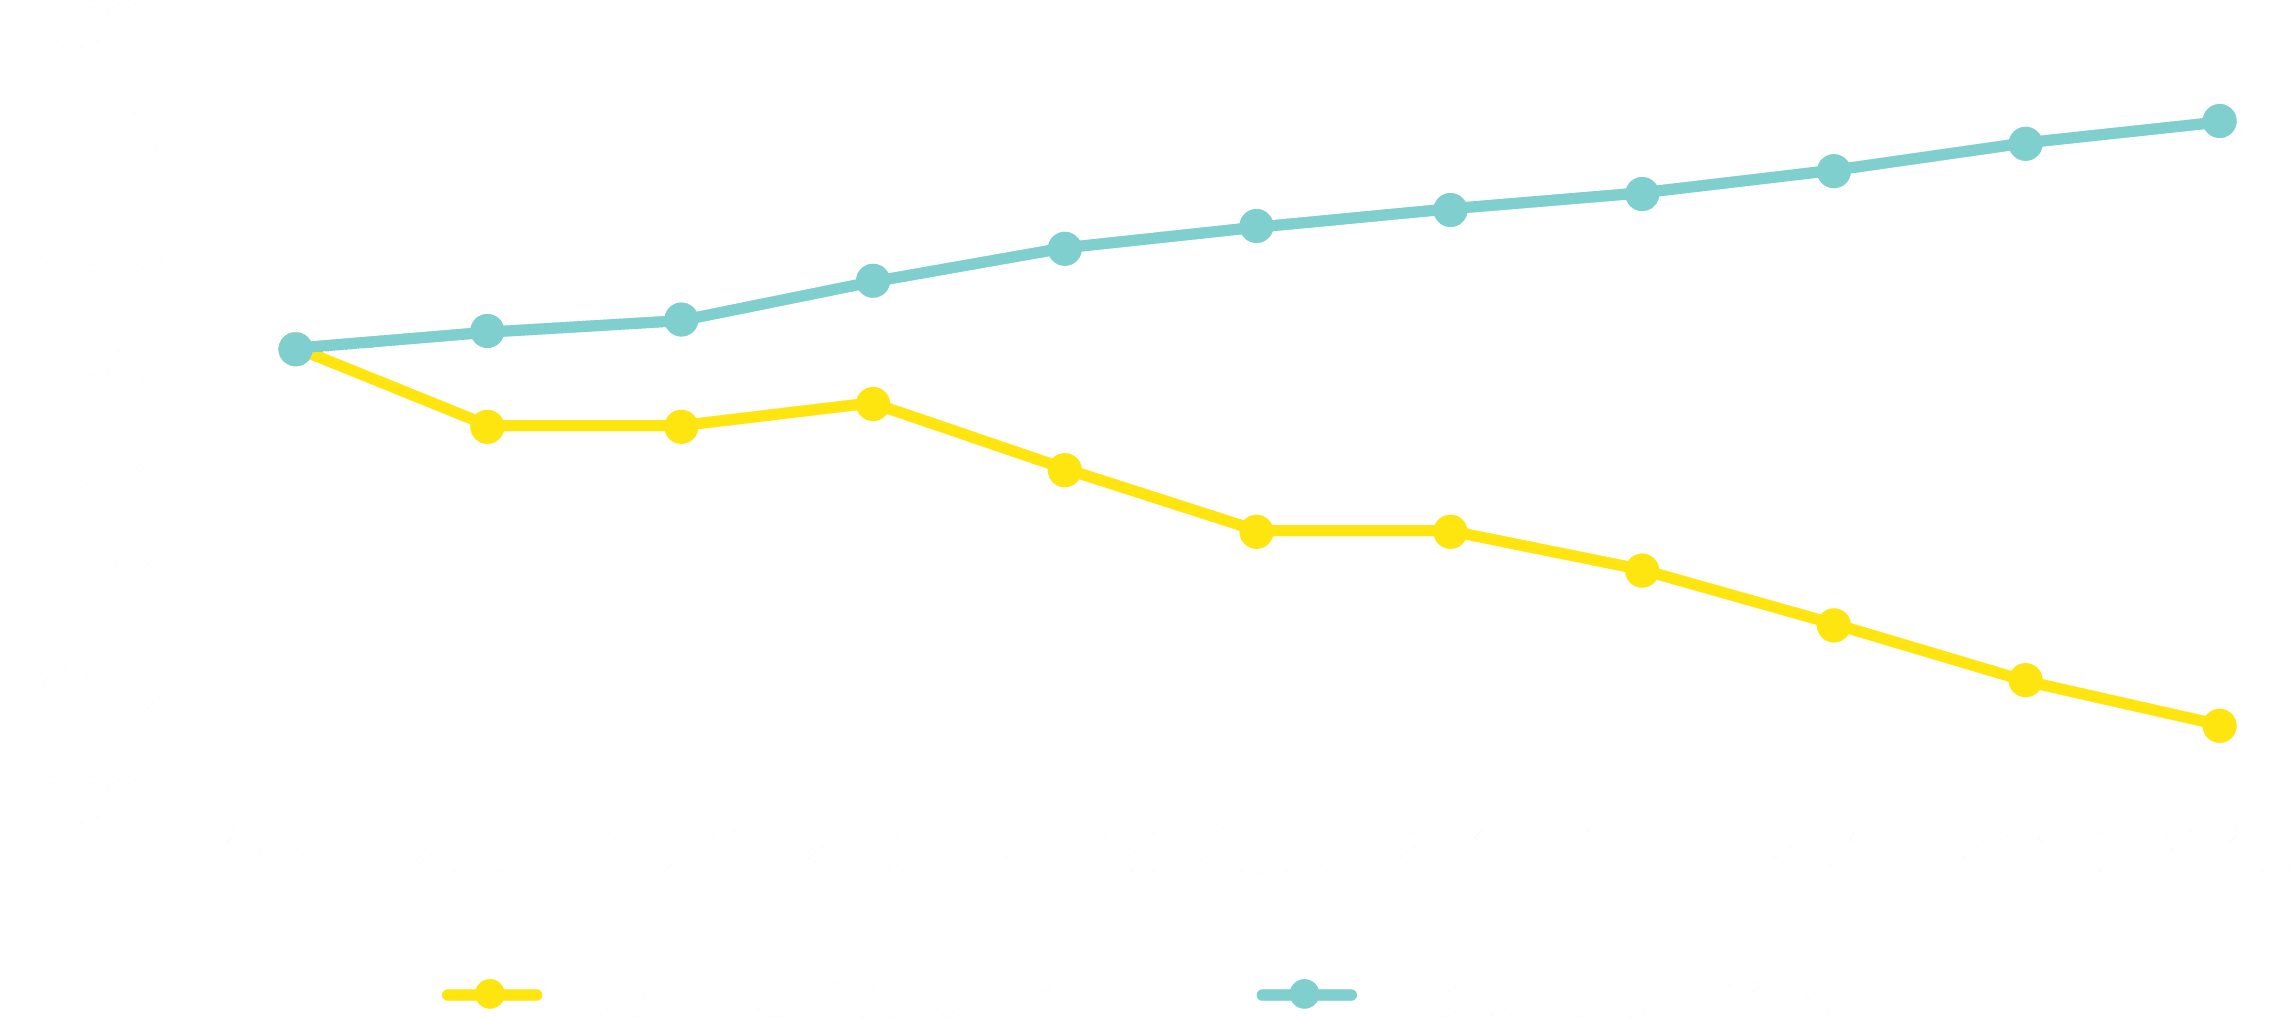 Graph of decline in library book circulation